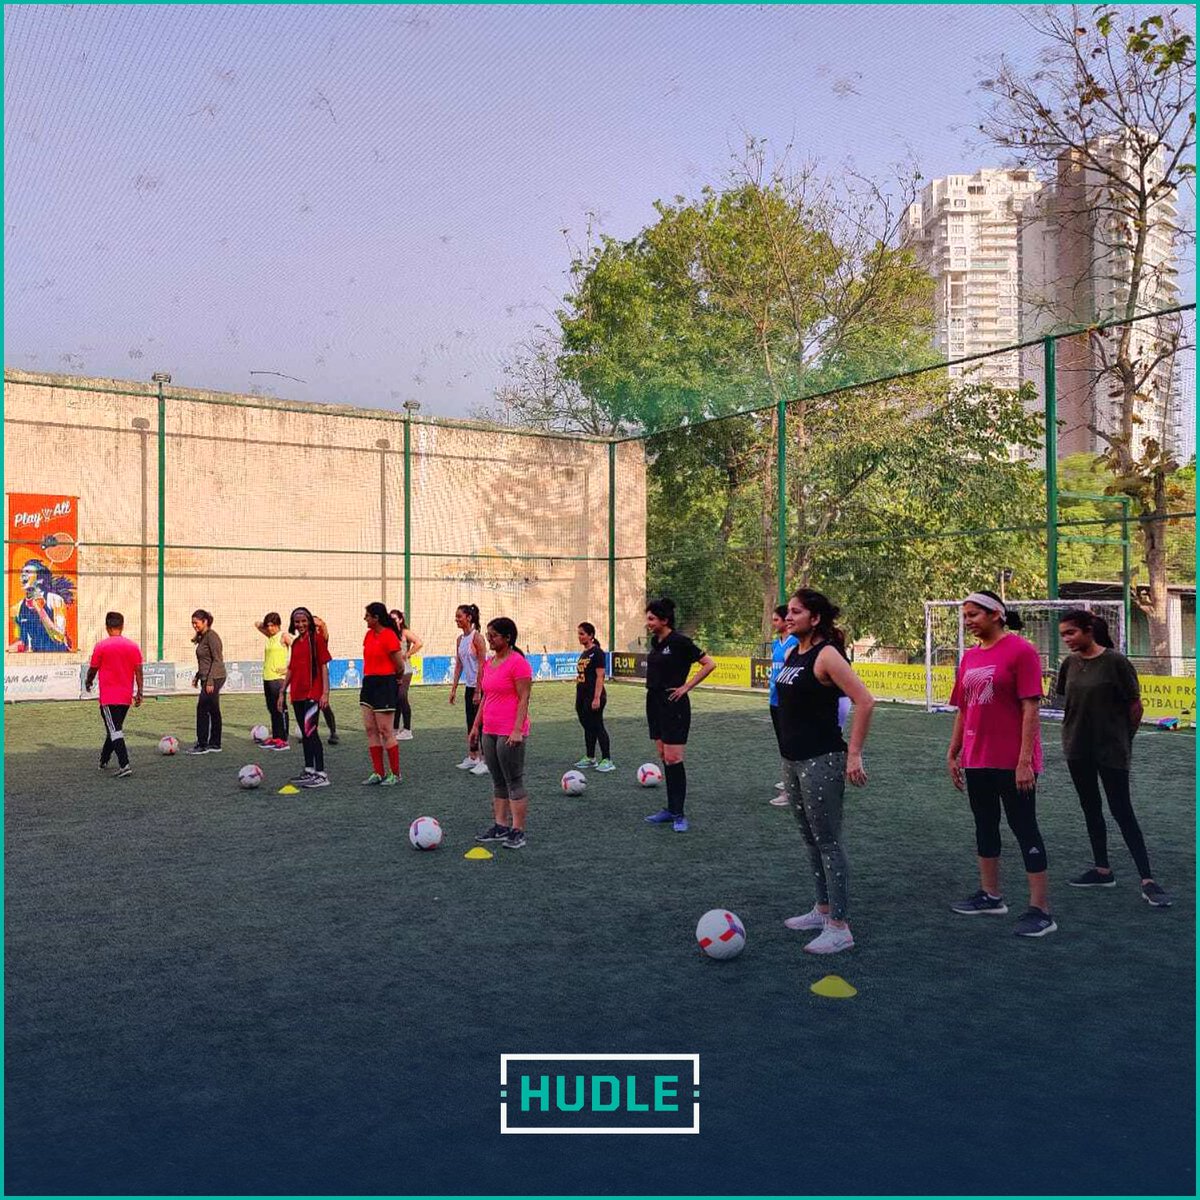 Looking back to those empowering days! ⚽⏳ Reminiscing of the incredible moments at Hudle Warriors' Women's Football sessions, where fierce warriors emerged on the field. 💪 Those memories will forever inspire and empower us in the game and beyond. #ThrowbackThursday #Hudle